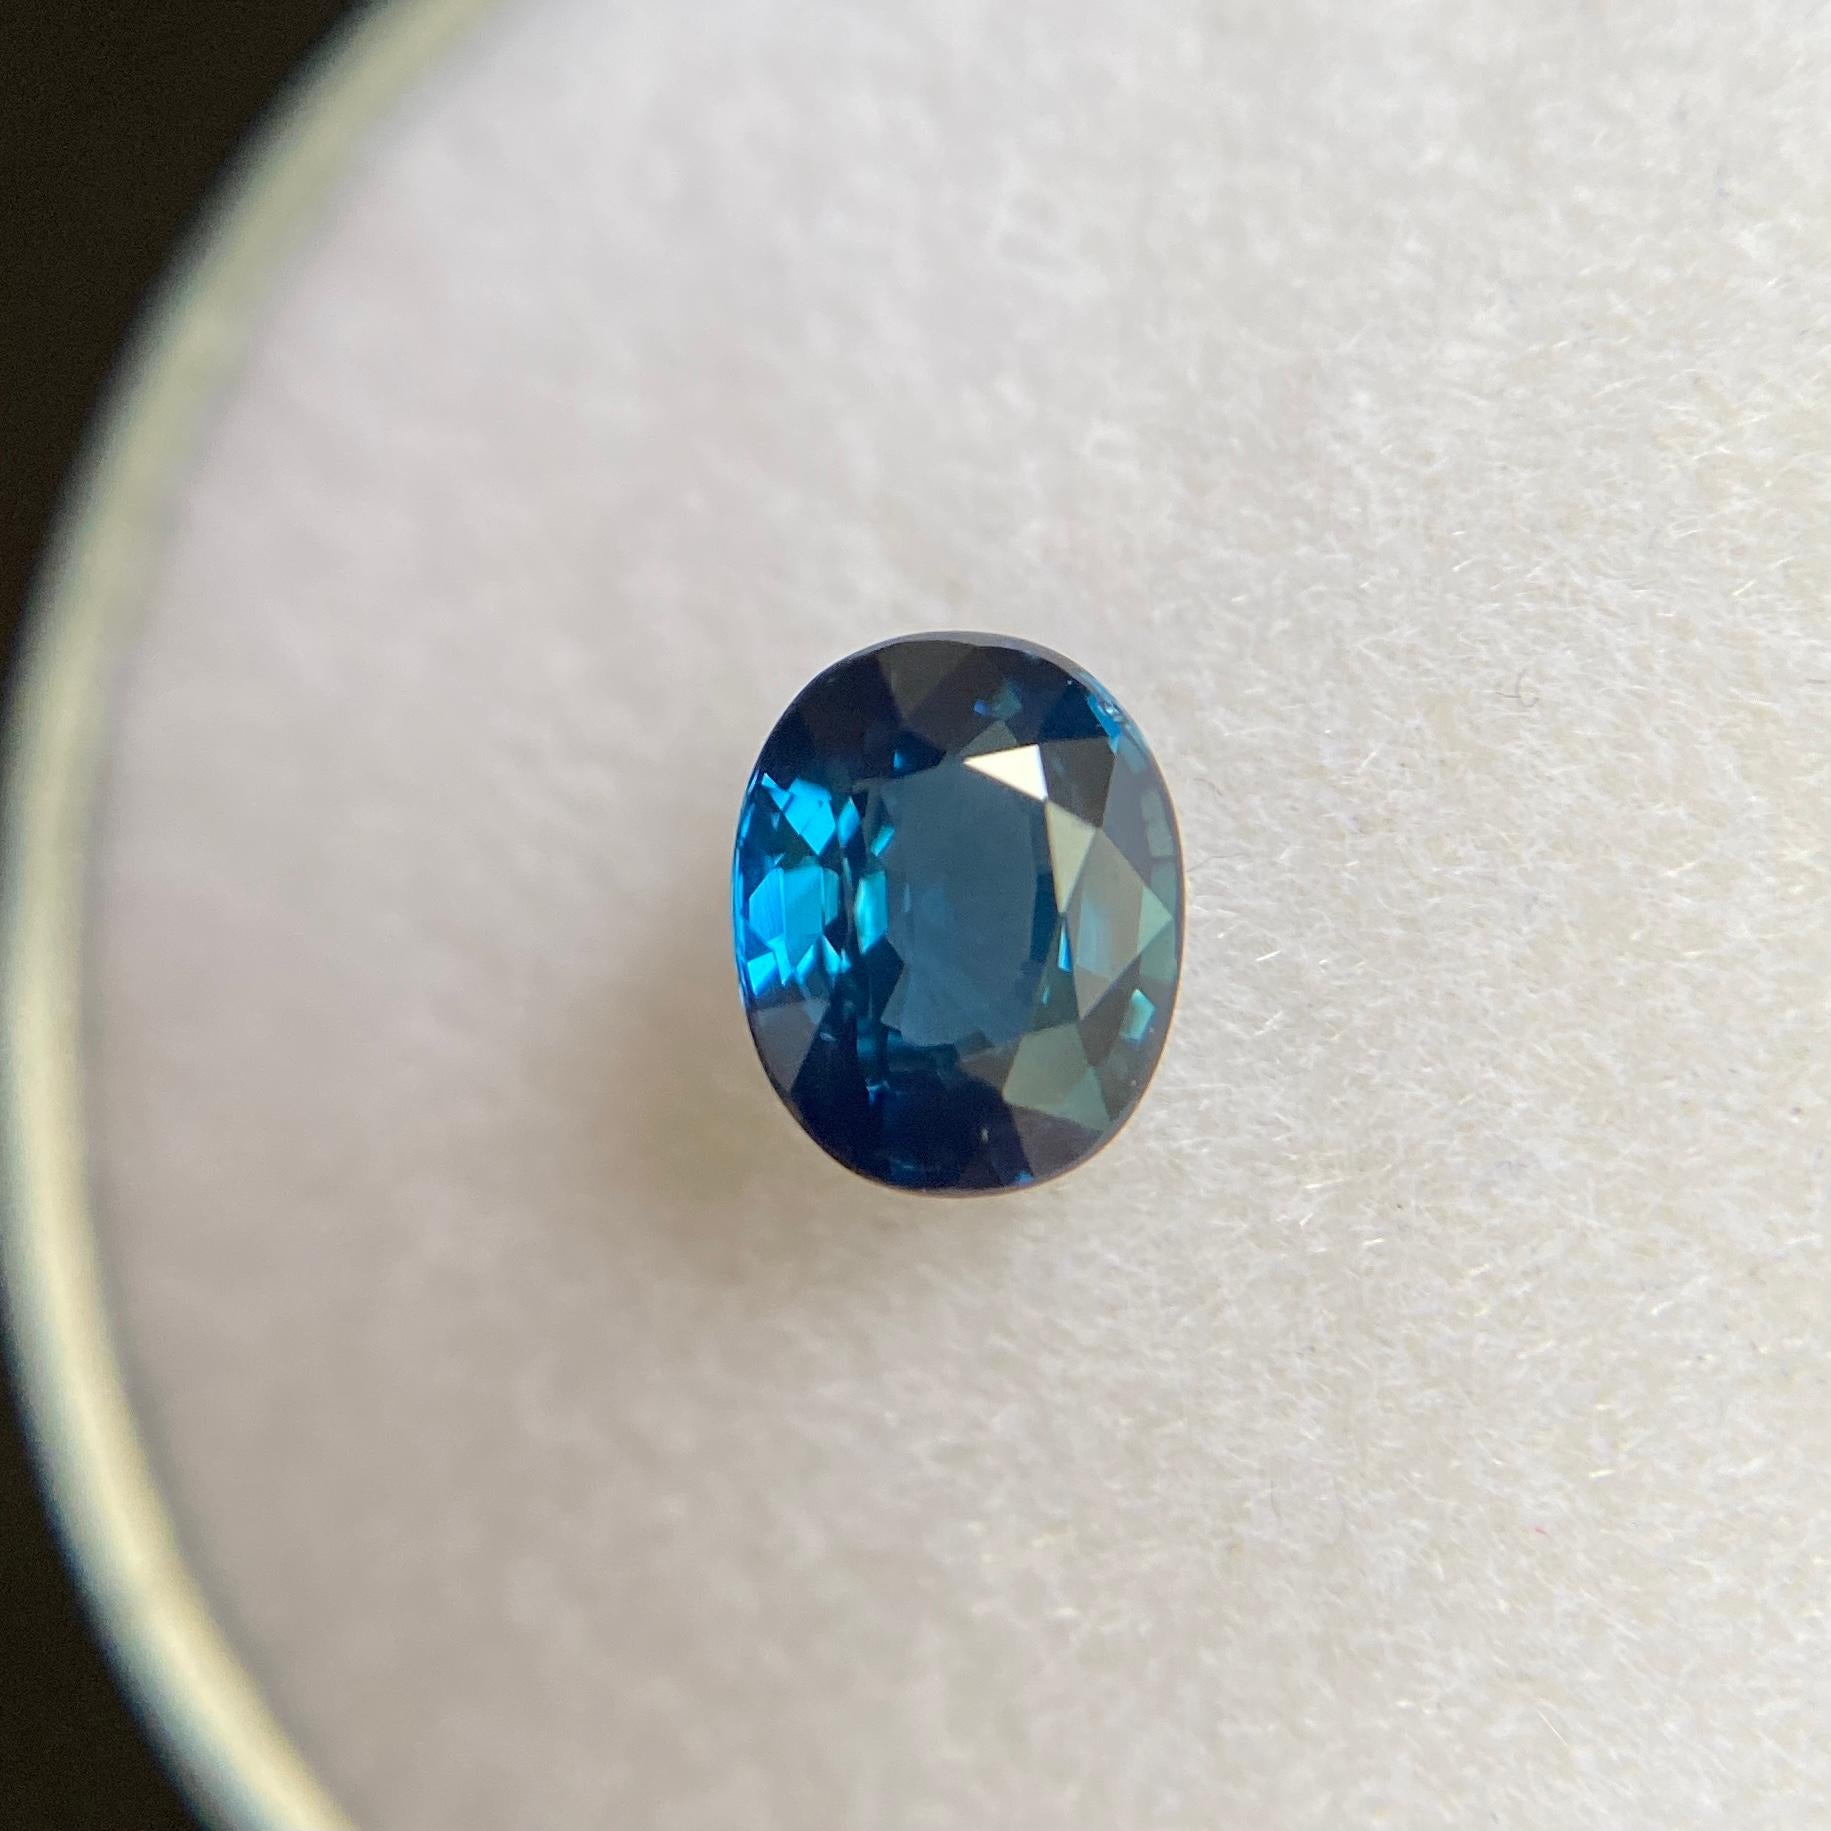 Fine Royal Blue Untreated Australian Sapphire Gemstone.

0.83 Carat with a beautiful royal blue colour and very good clarity. Very clean stone with only some small natural inclusions visible when looking closely.

Also has an an excellent oval cut